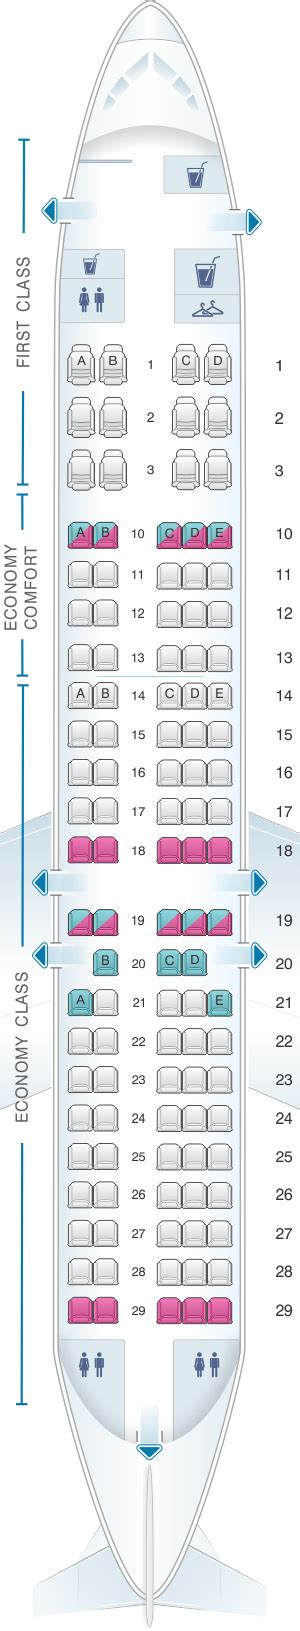 There are over 160 757-200 in the Delta fleet. These aircraft are flown in 9 different configurations. SeatGuru provides maps for each version. Versions can be verified by looking at the live seat maps on the Delta site which show specific seat availability at the time of ticket purchase or at online checkin.